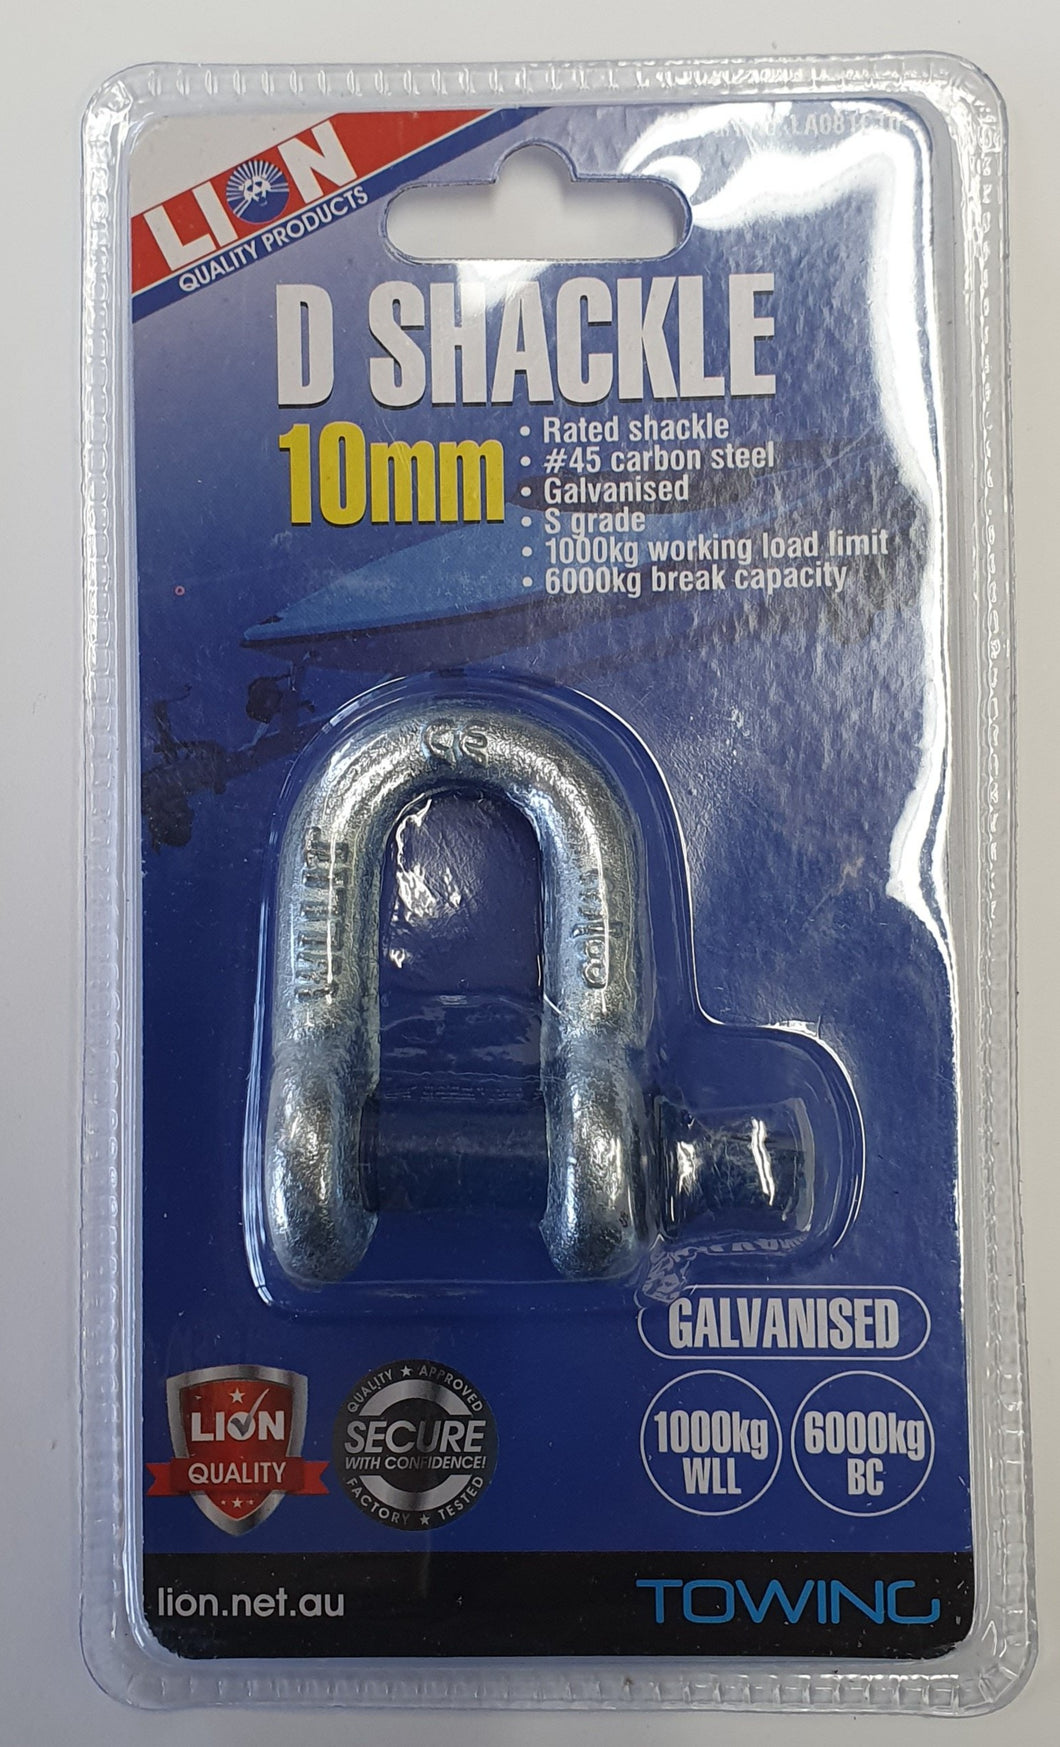 D SHACKLES 10MM QTY1 RATED